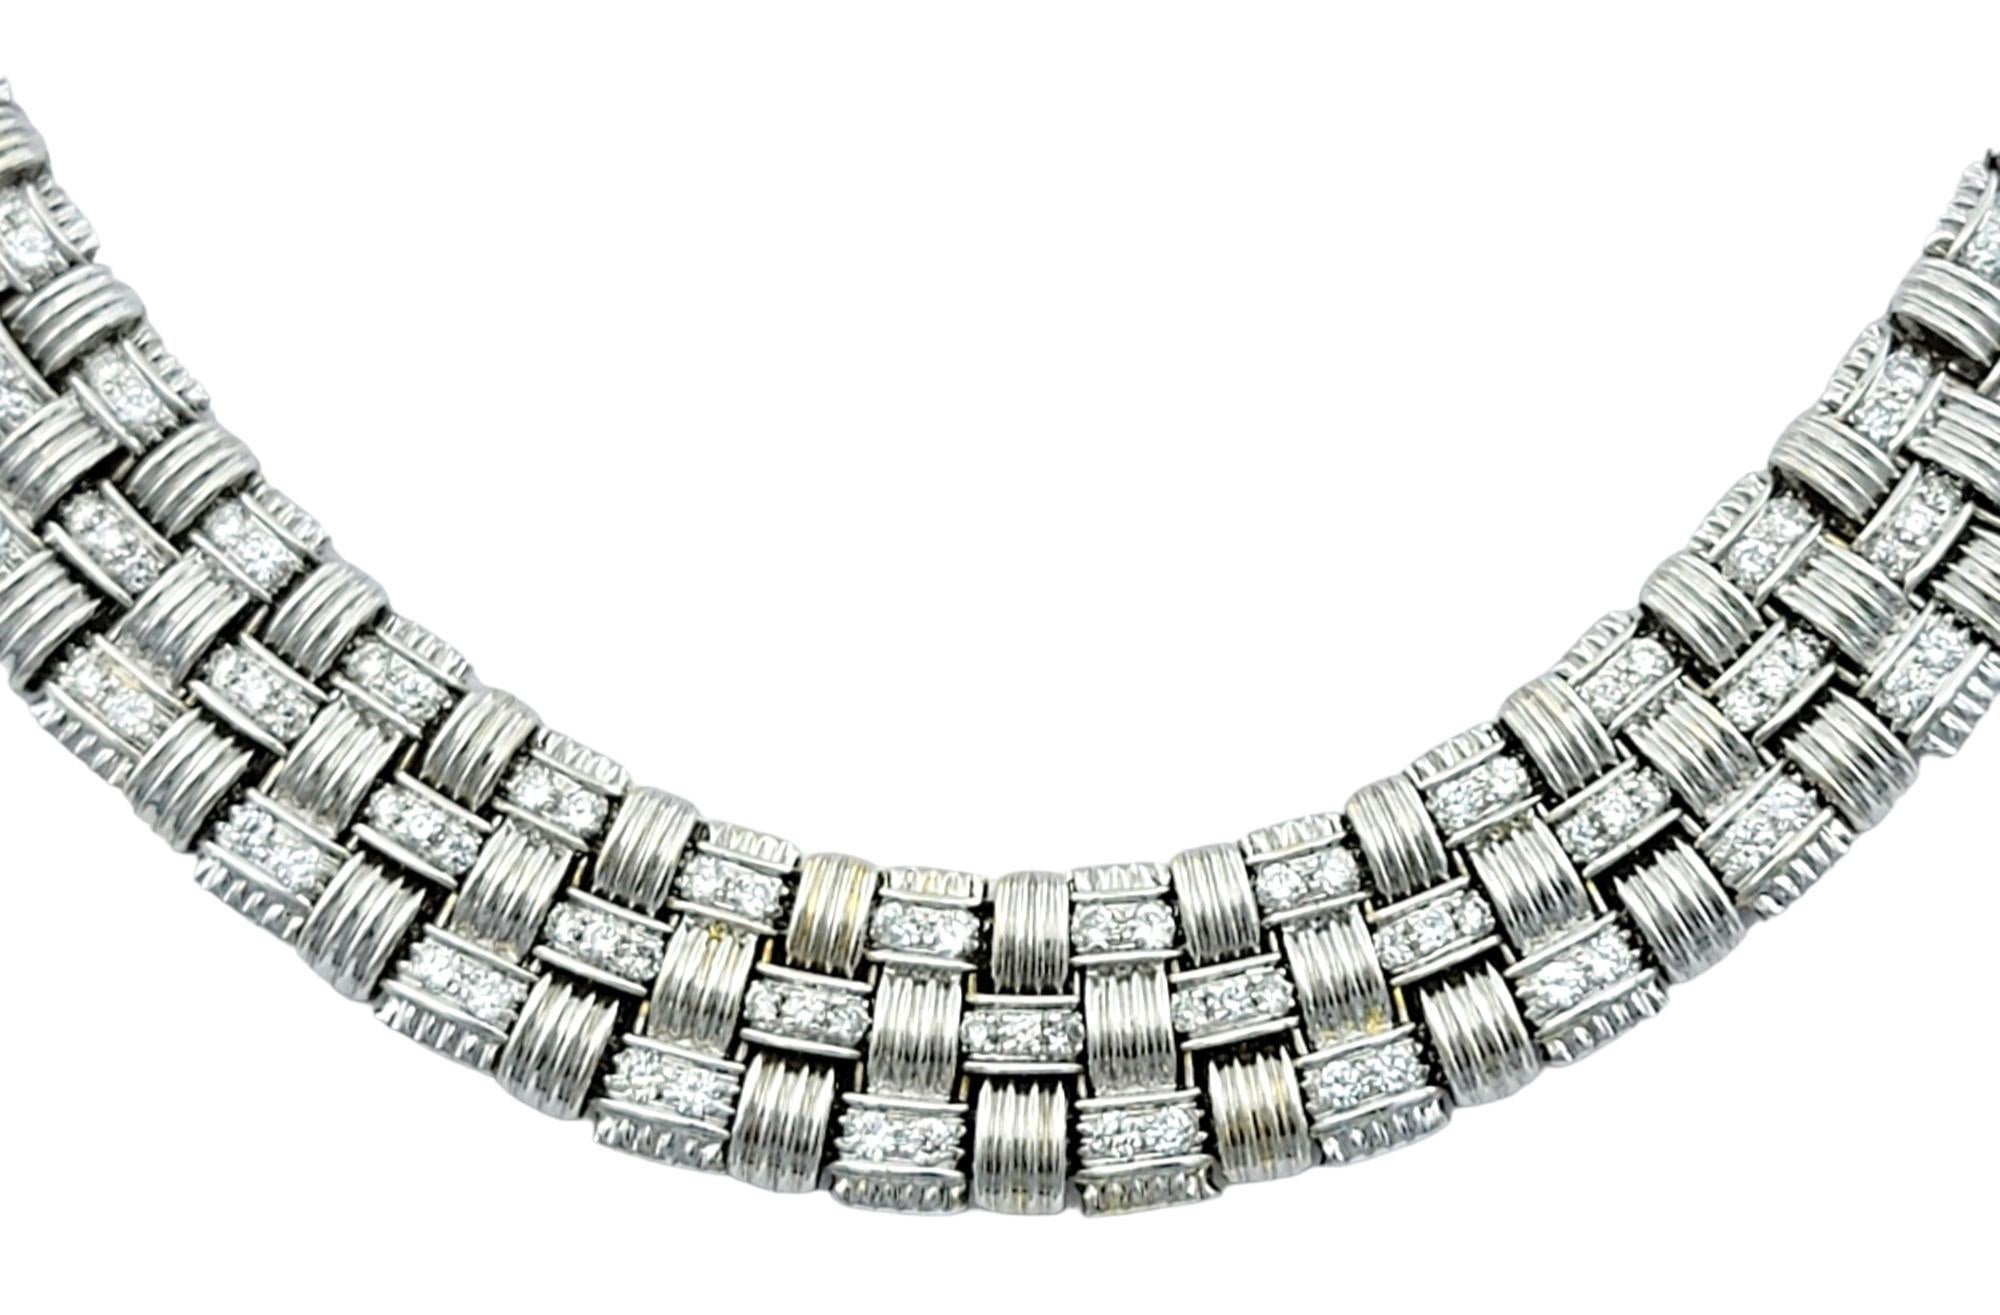 This gorgeous Roberto Coin Appassionata diamond collar necklace exudes timeless elegance with its intricate woven design. Crafted in luxurious 18 karat white gold, this necklace is a stunning piece of craftsmanship.

The delicate detail of the woven